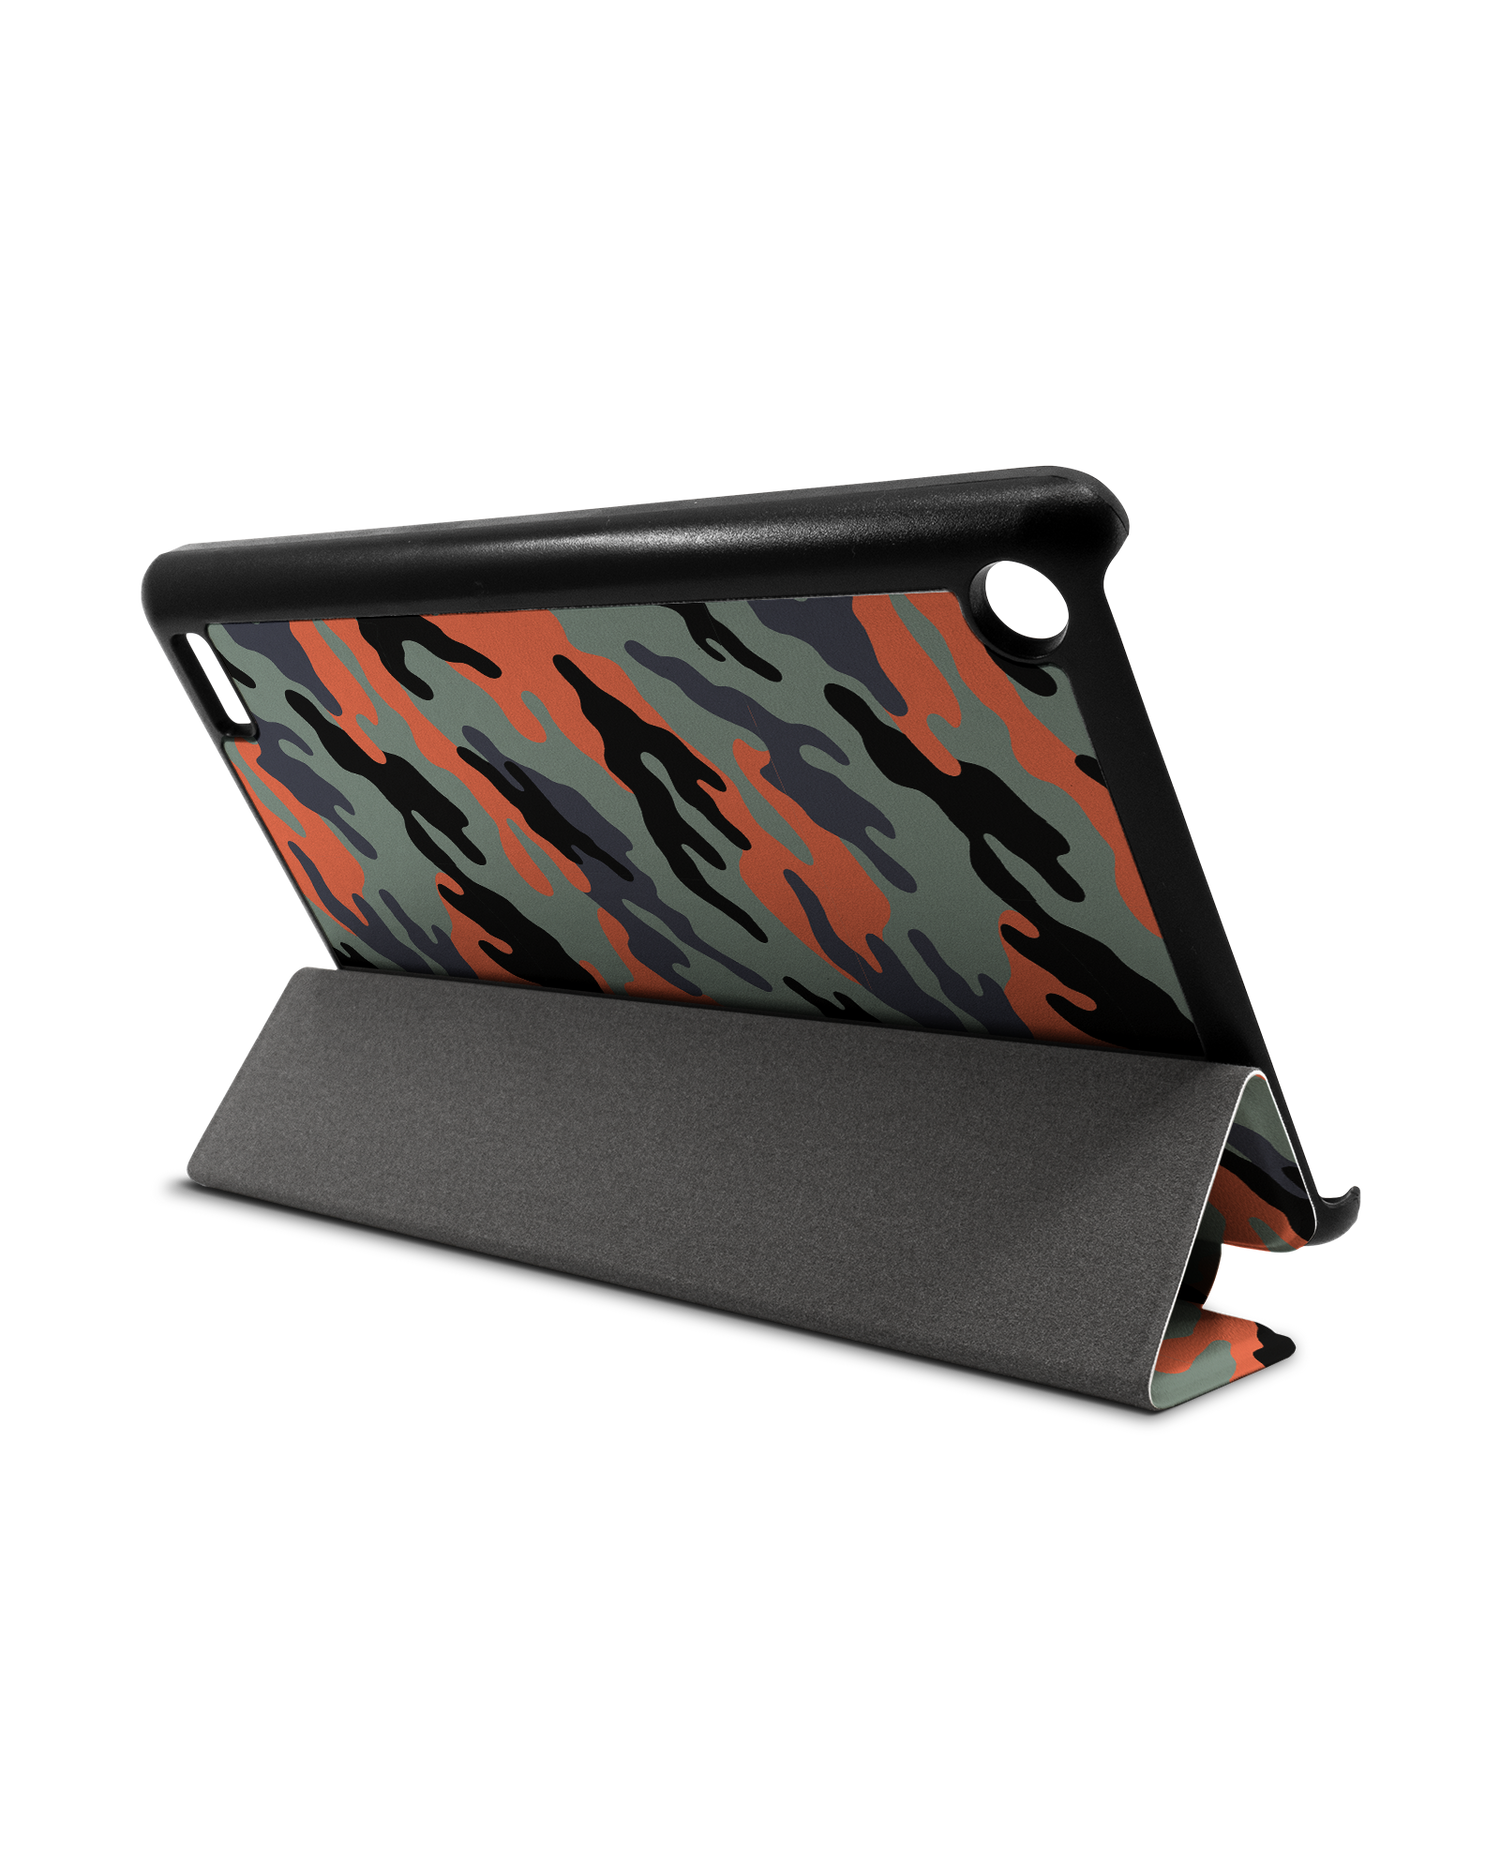 Camo Sunset Tablet Smart Case for Amazon Fire 7: Used as Stand